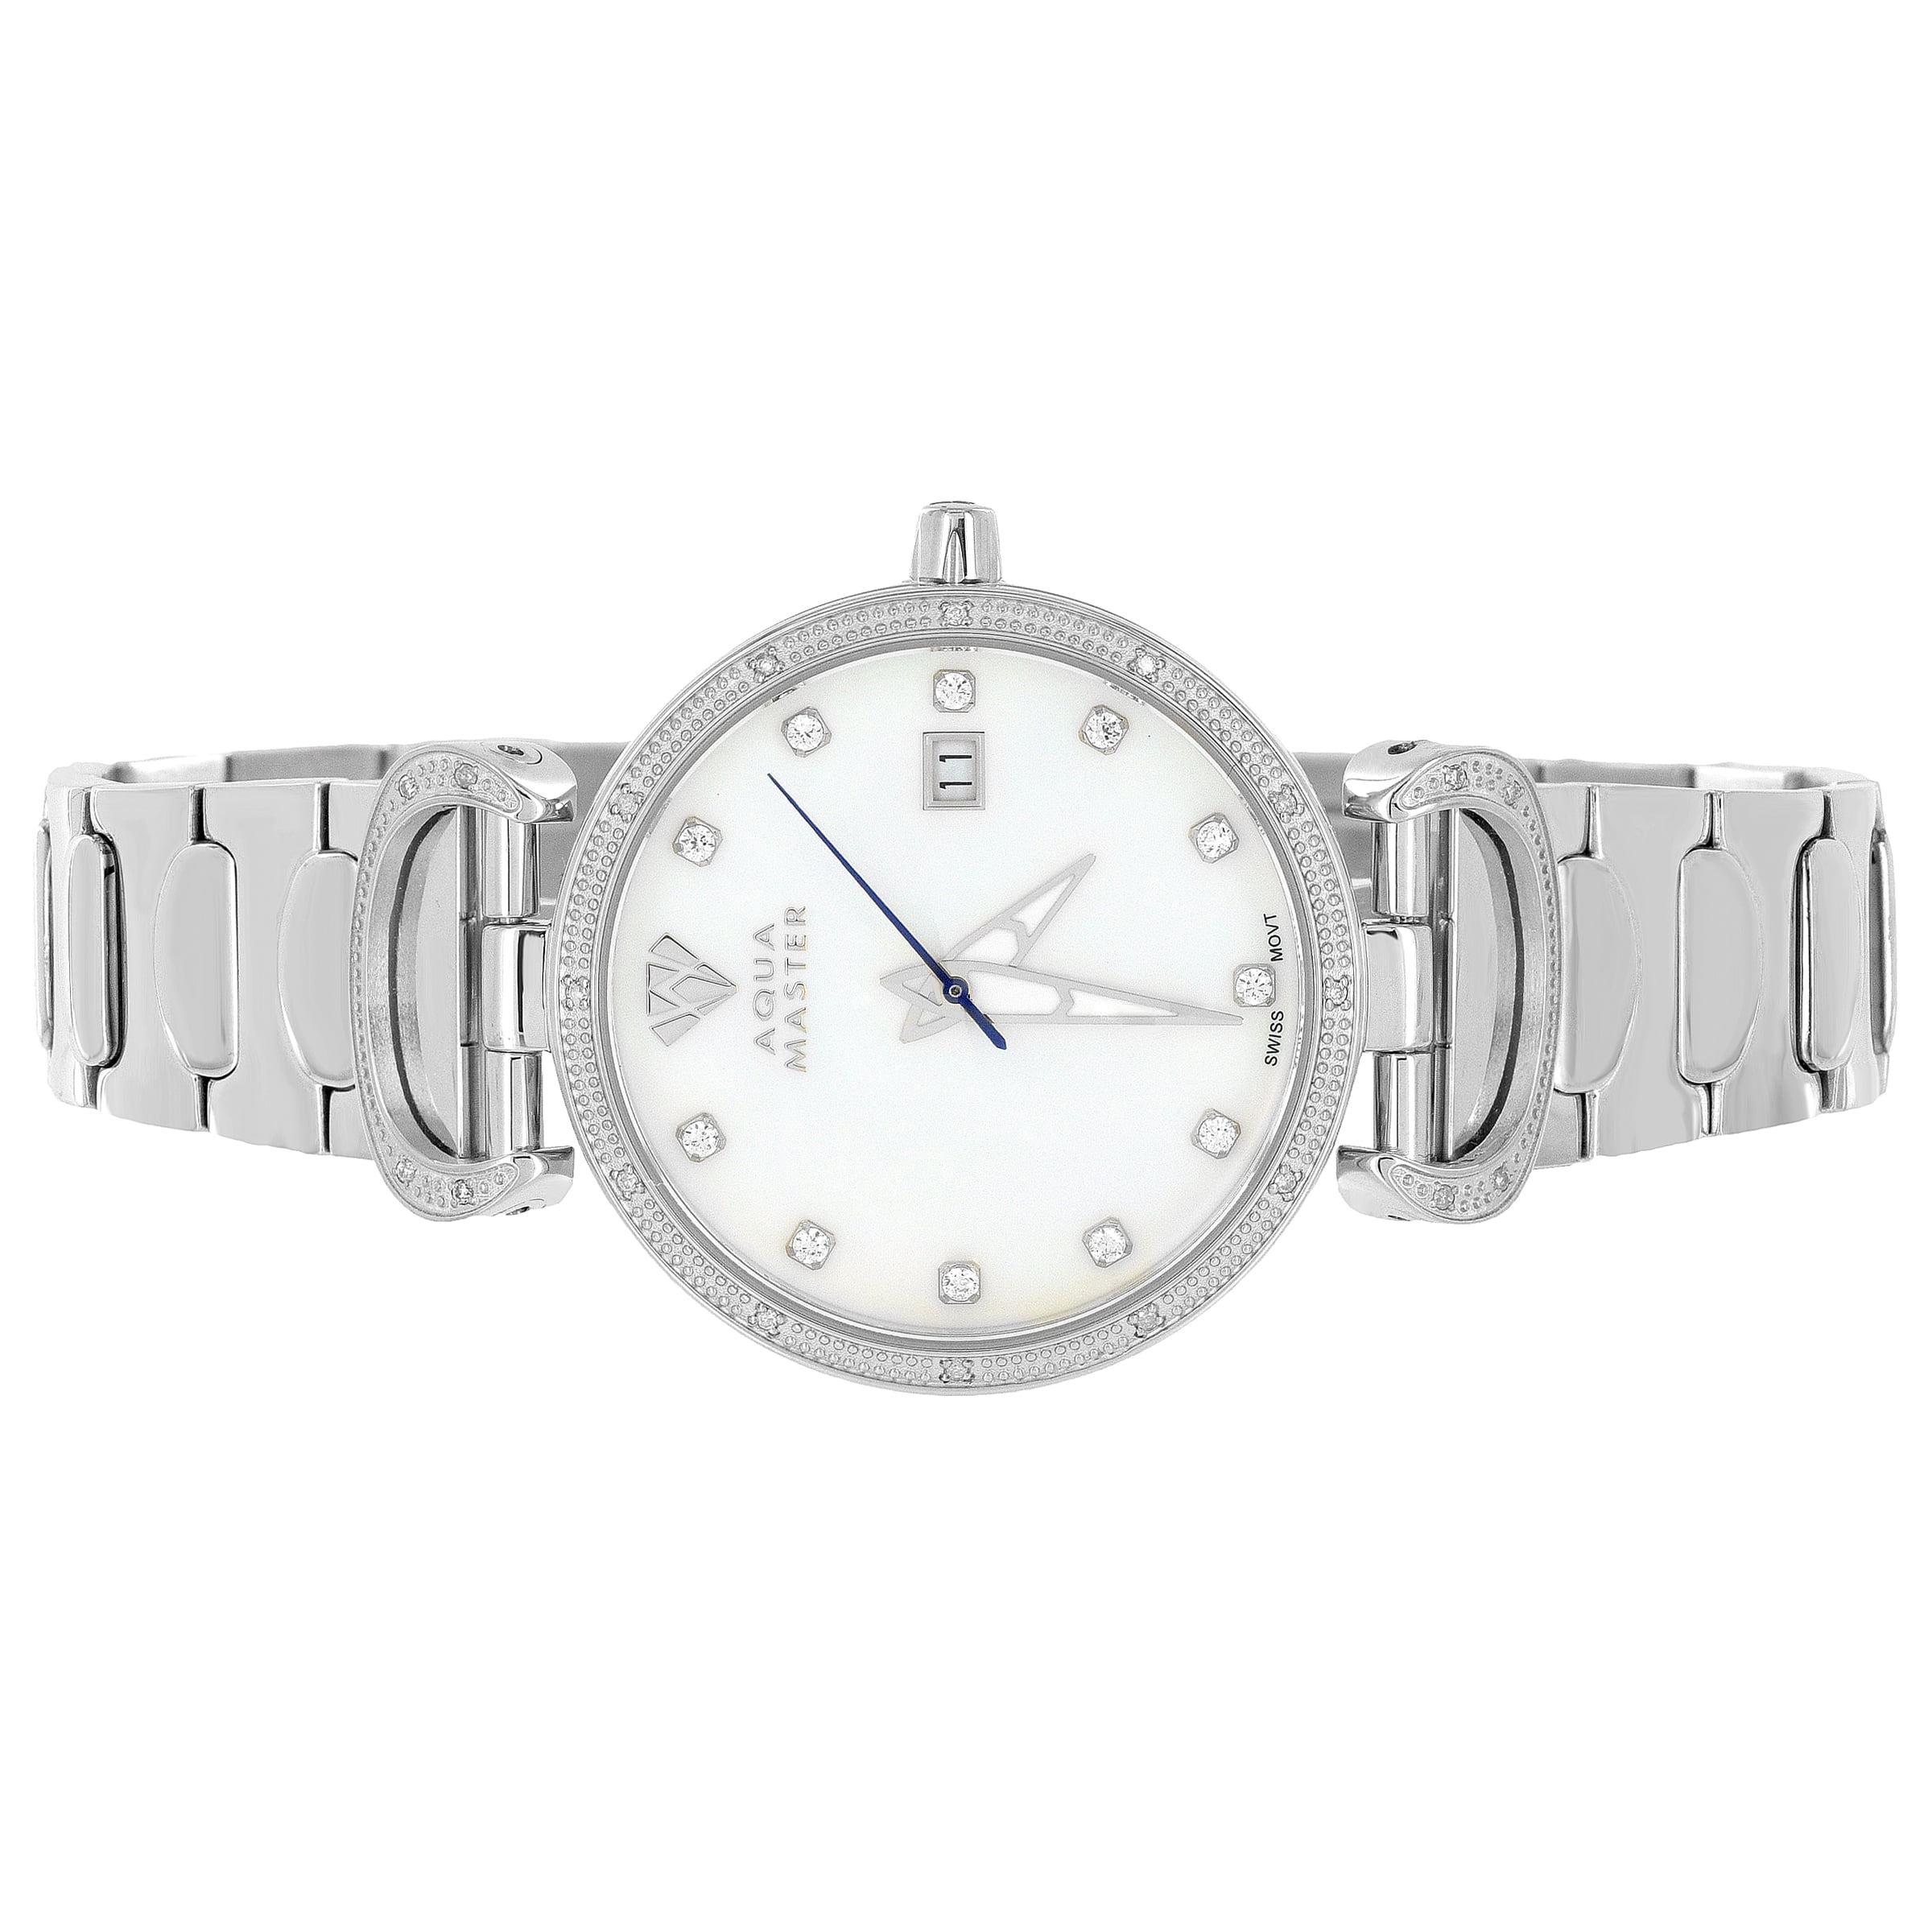 Silver Aqua Master Watch Stainless Steel Mother Of Pearl Dial Watch 0 ...